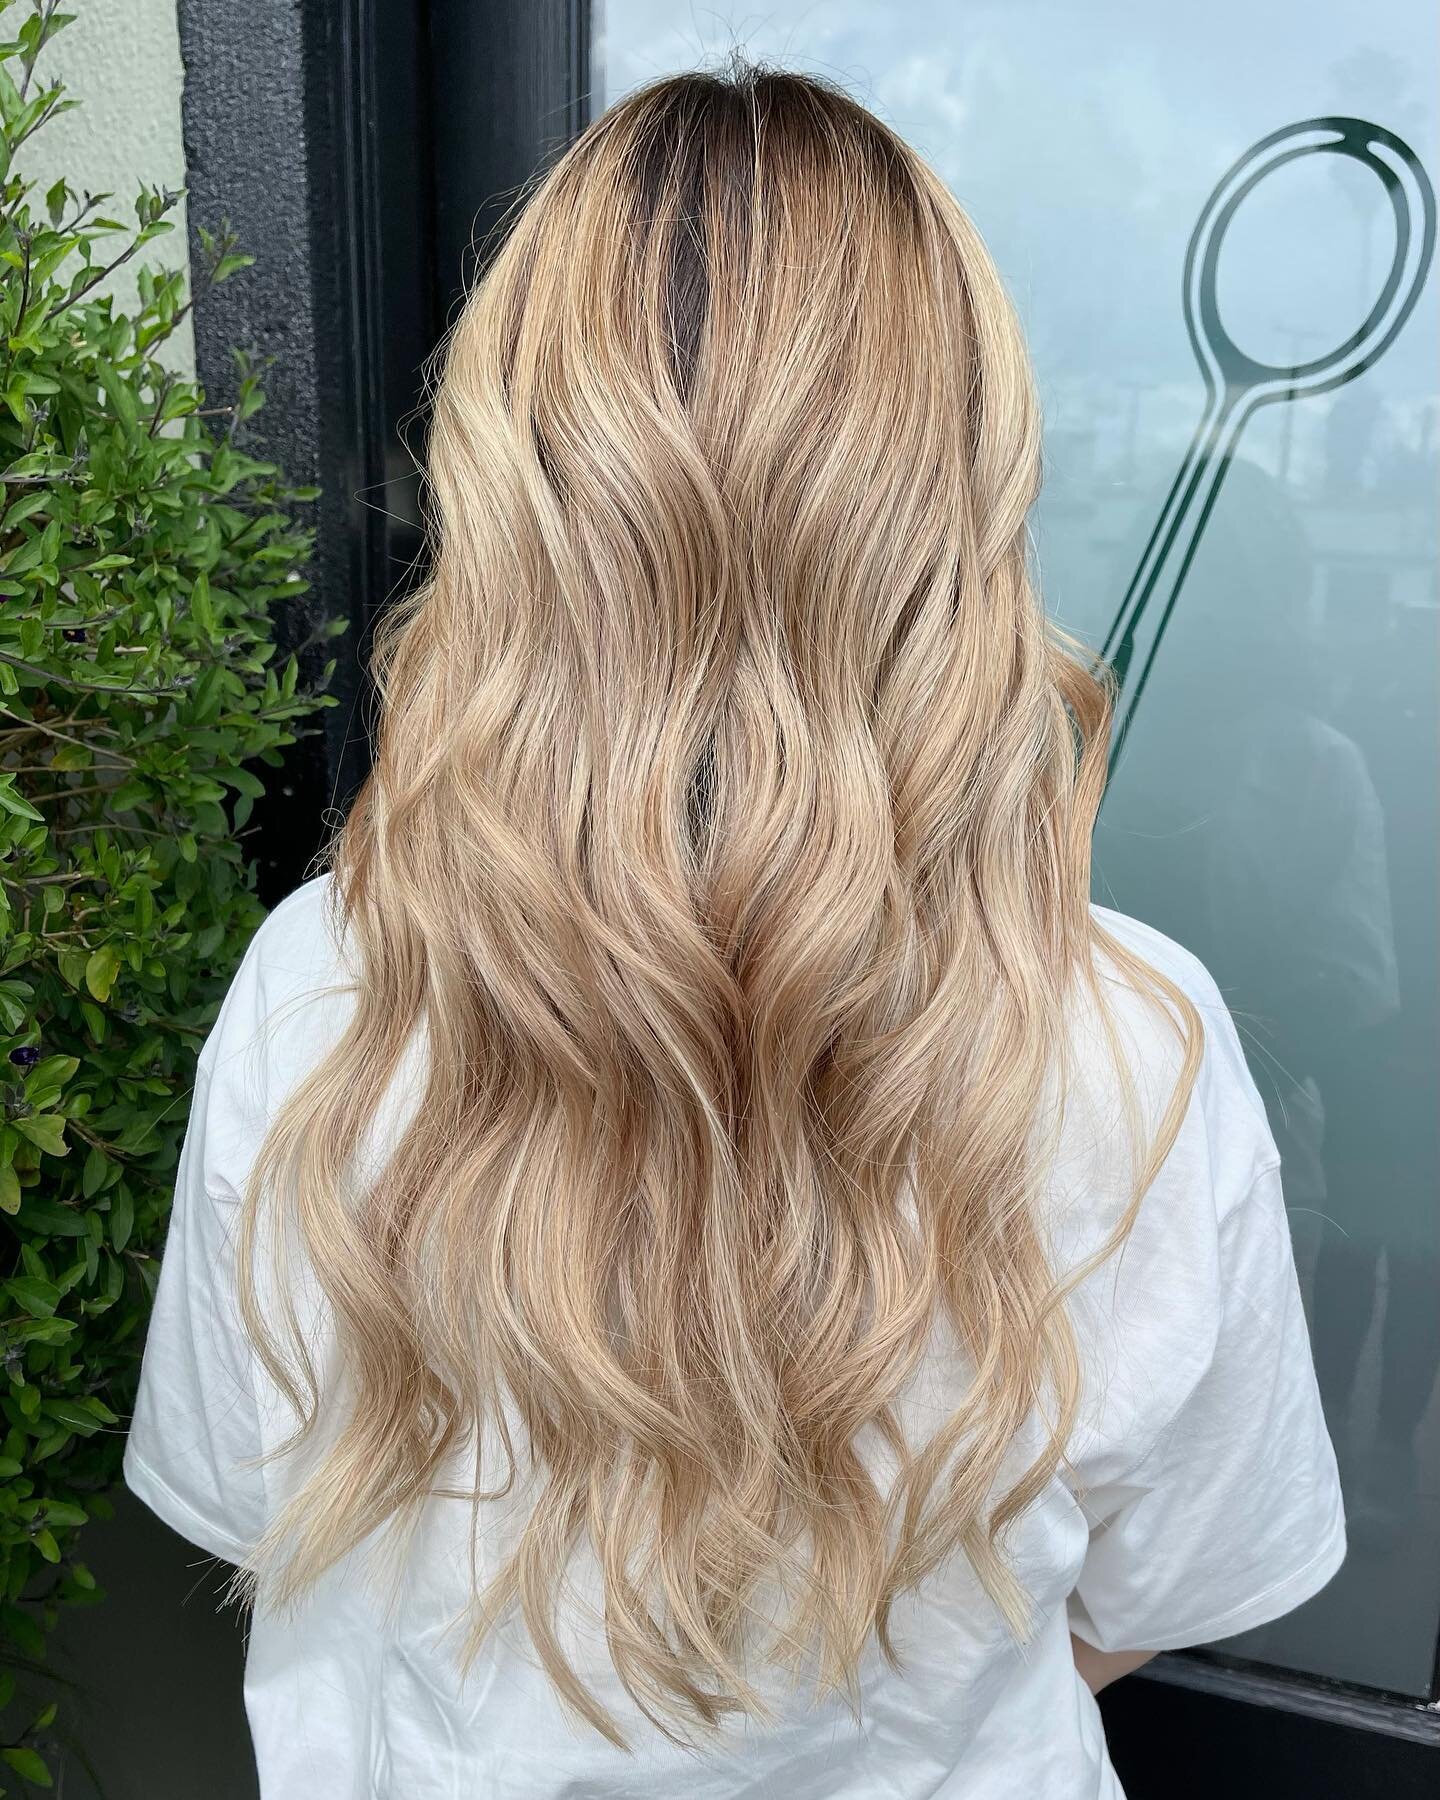 Hand tied extensions using @hotheadshairextensions 🤍 swipe for before! By @allipaintshair 

#ragesaloncampbell #hotheadshairextensions #bayareahairstylist #modernsalon #behindthechair